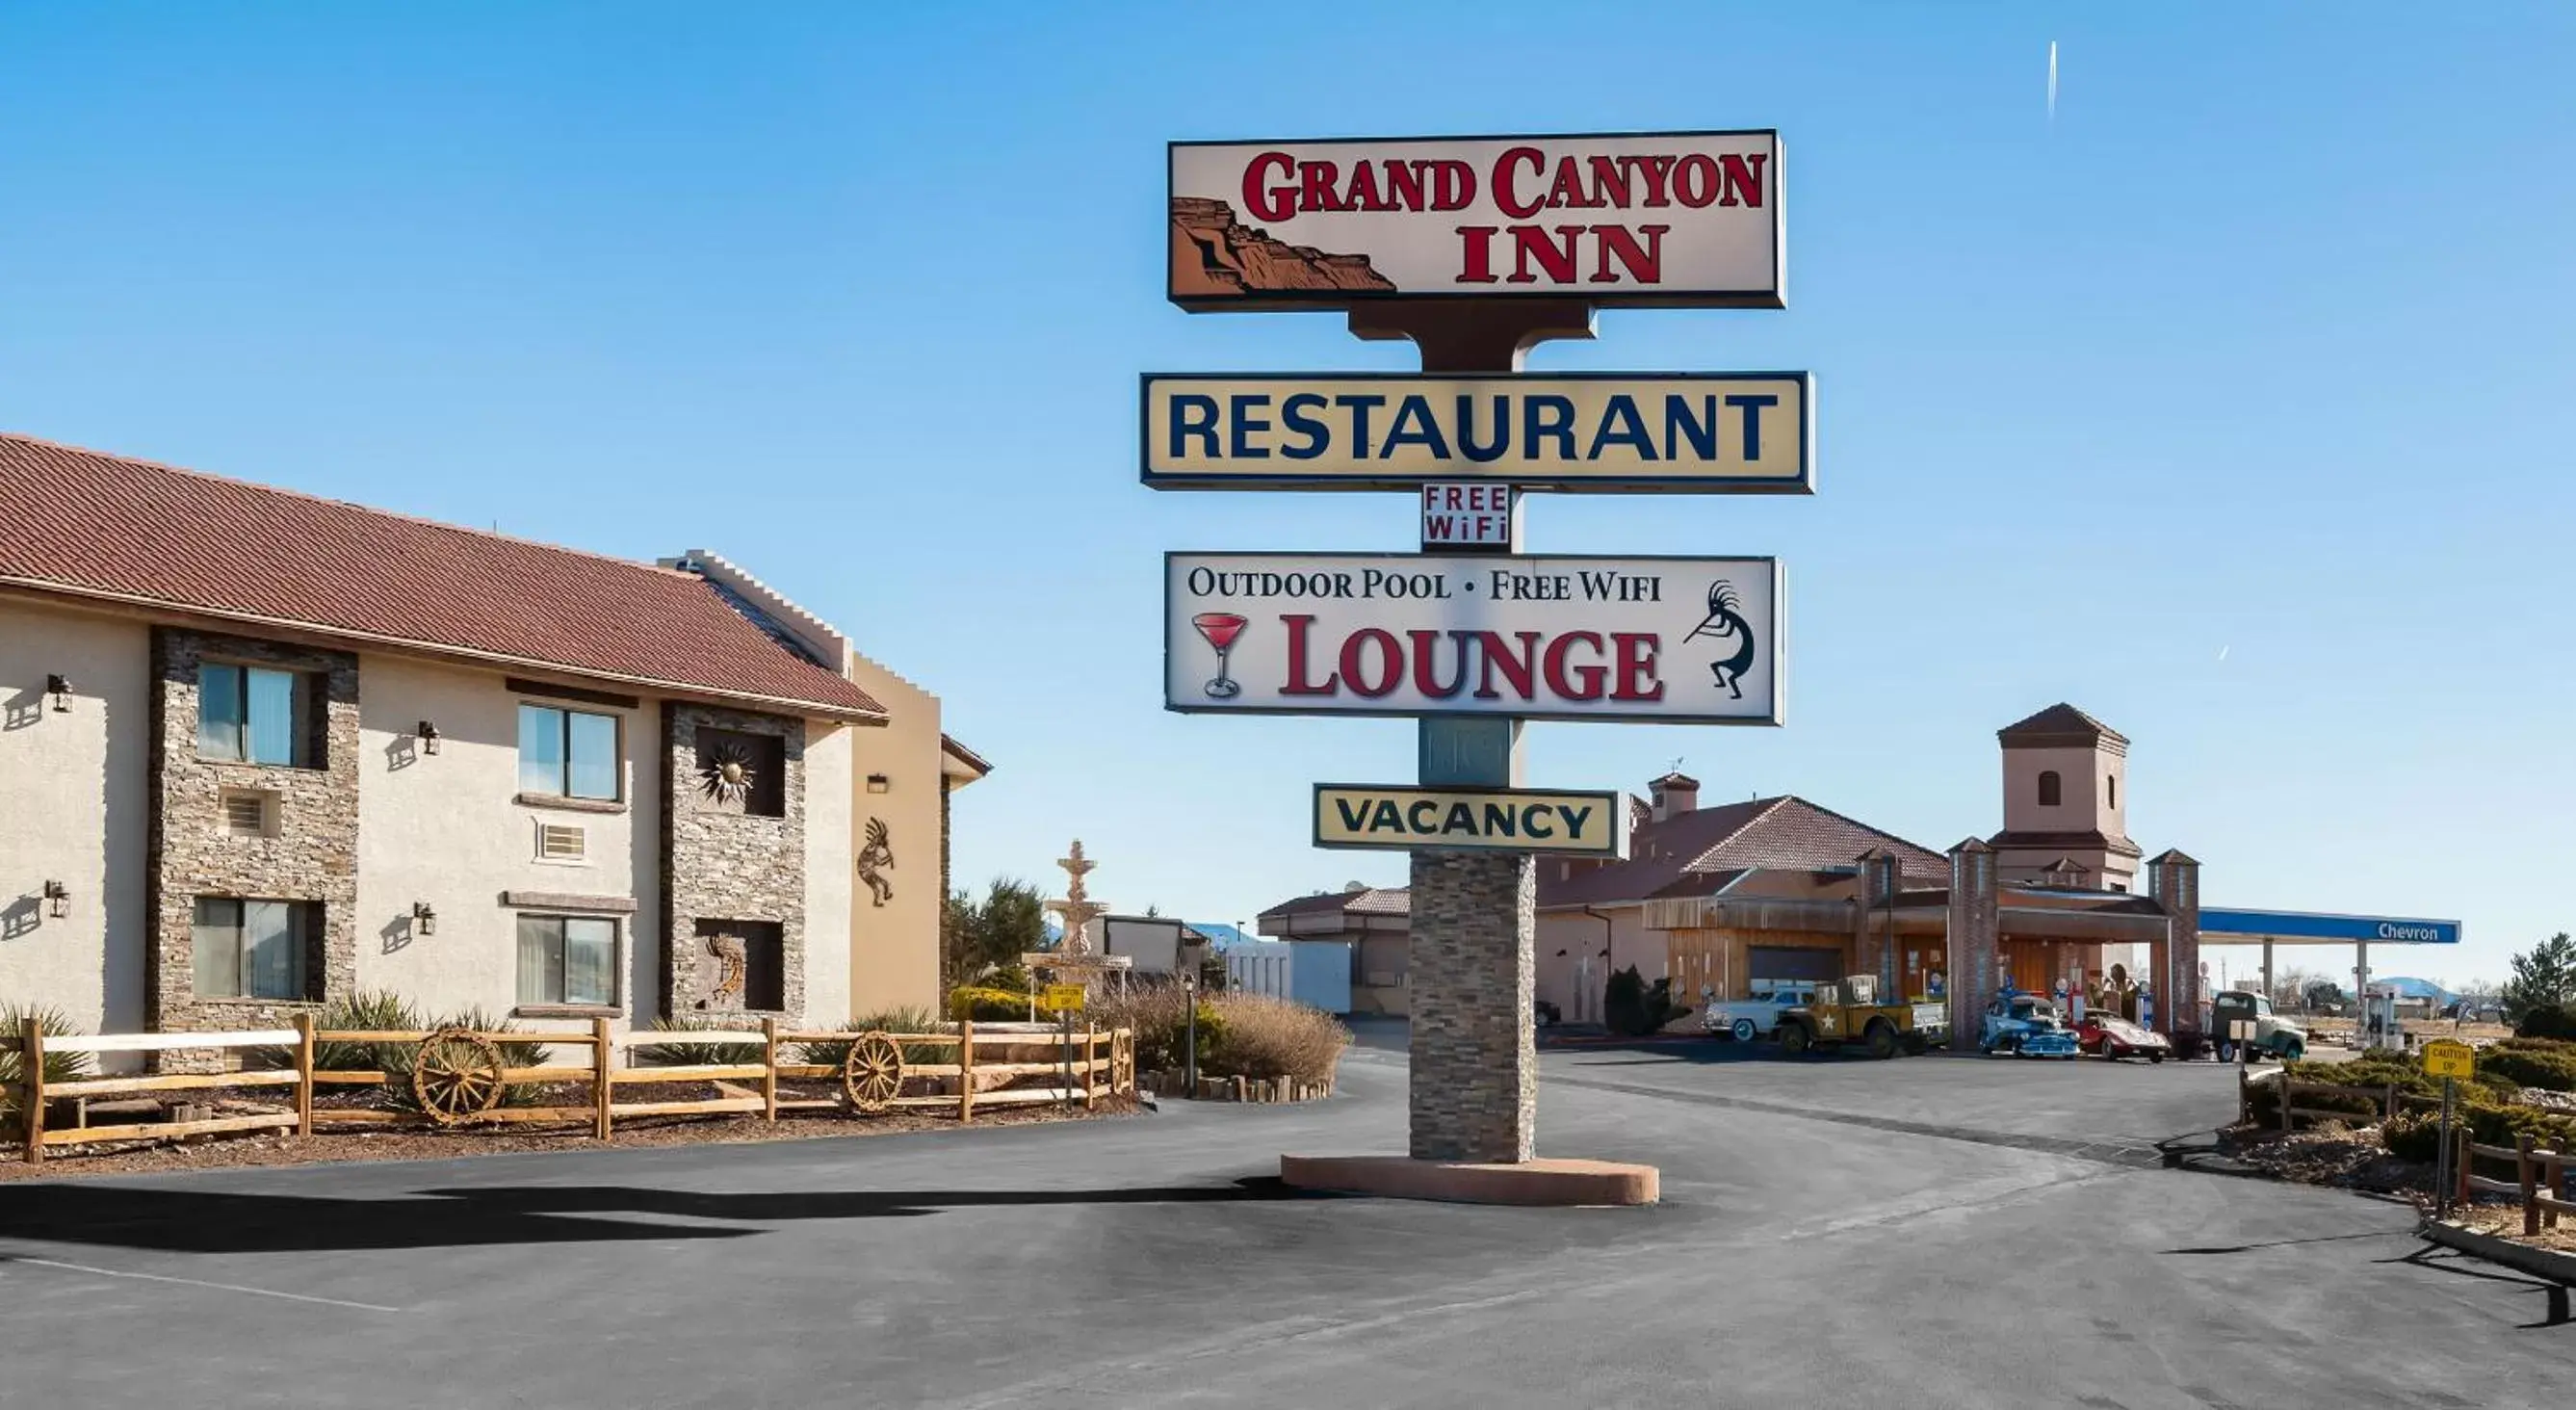 Property Building in Grand Canyon Inn and Motel - South Rim Entrance